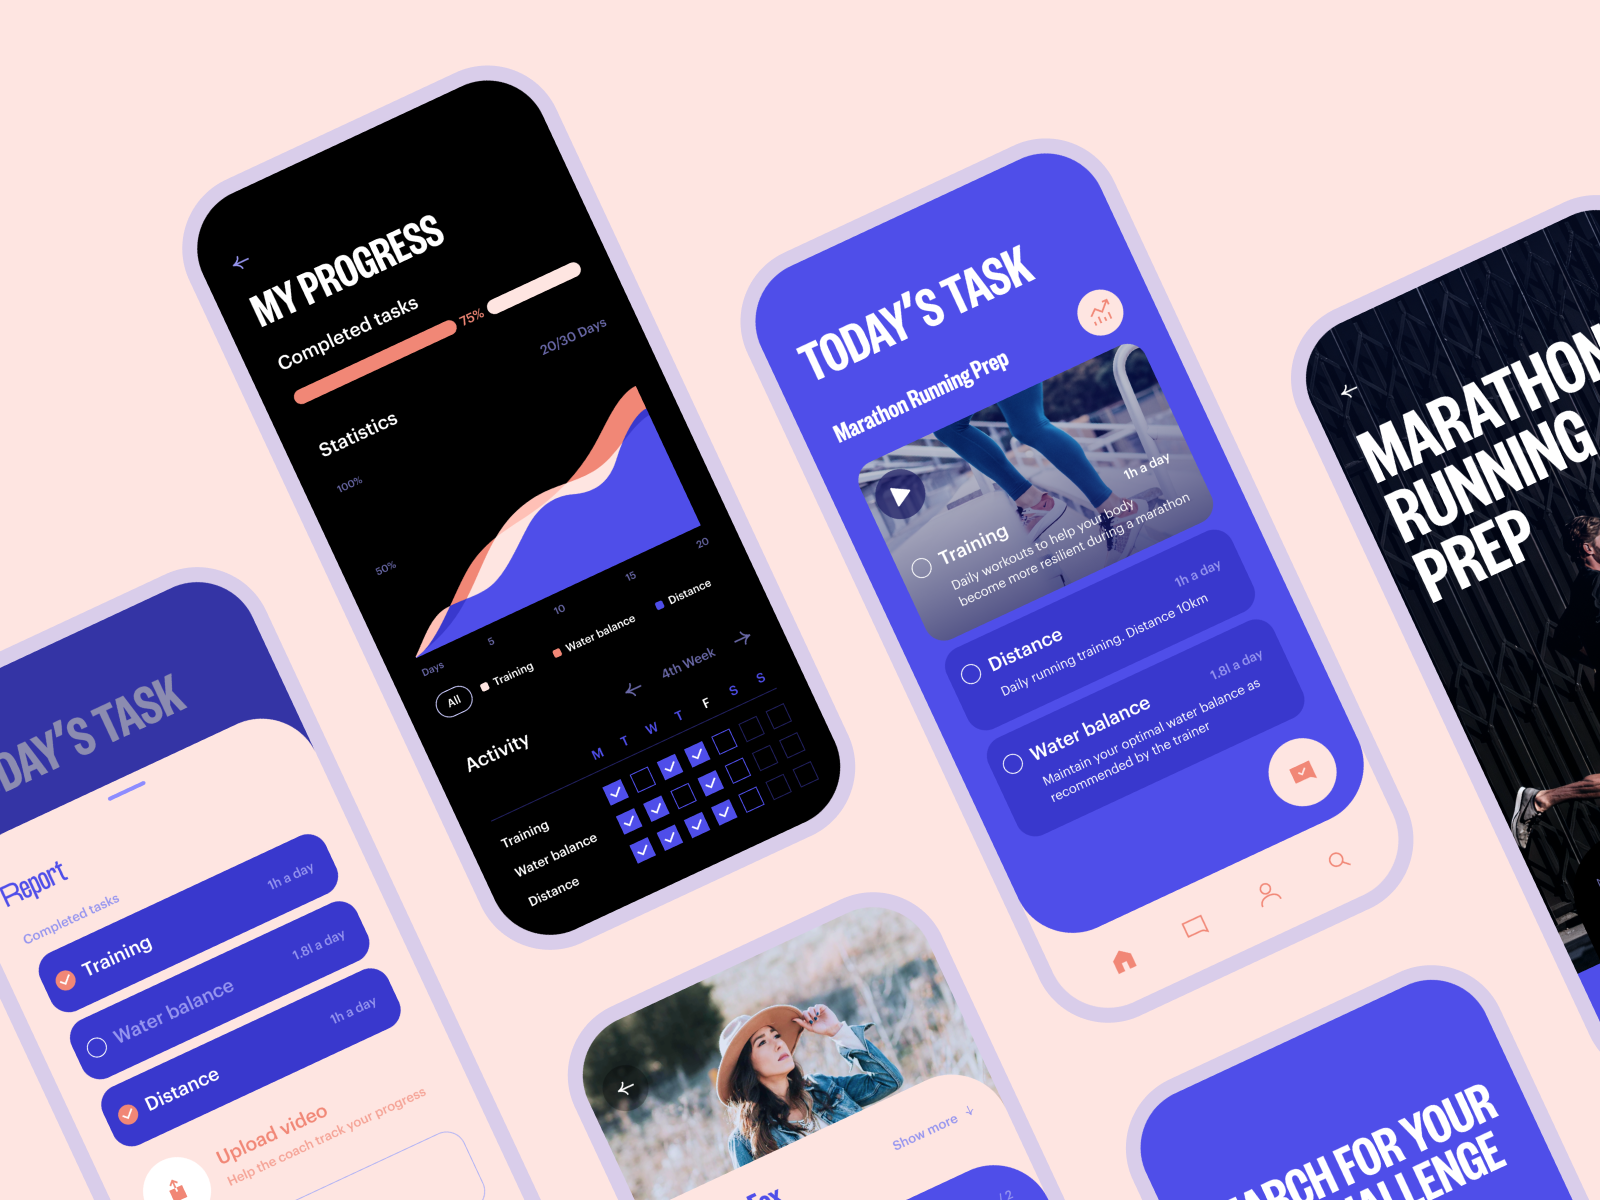 17 Inspiring Examples of Mobile Interaction Design